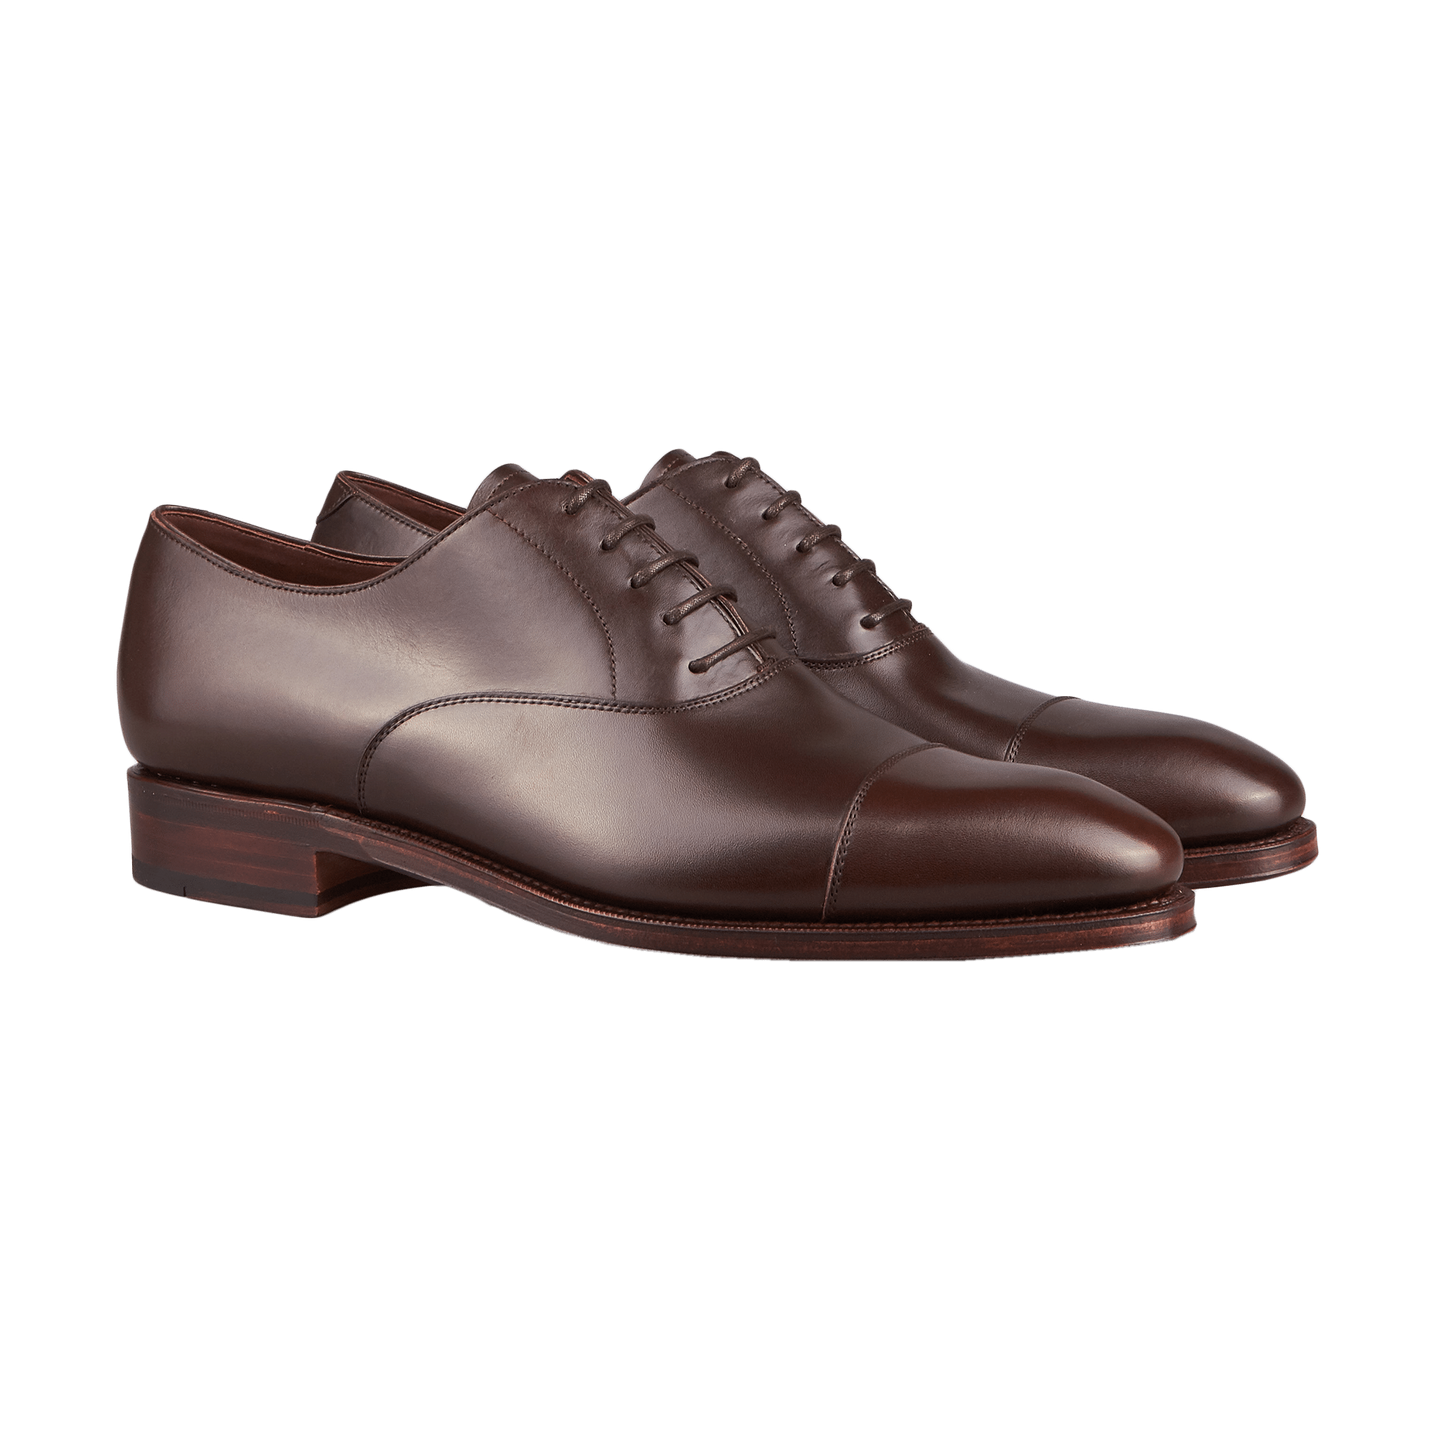 All Leather Oxford Shoes | lupon.gov.ph